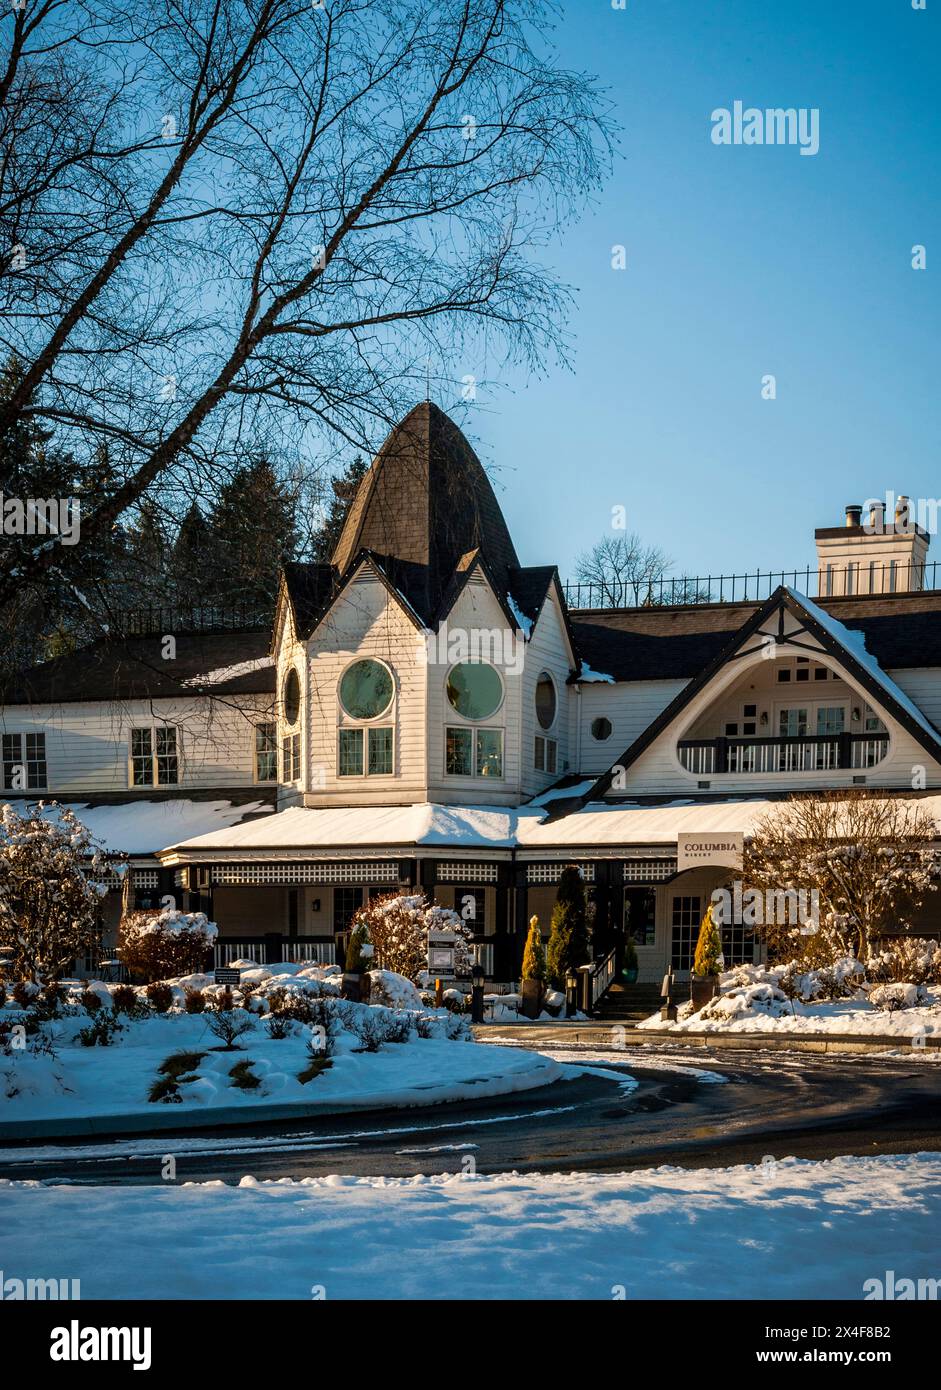 USA, Washington State, Woodinville. Winter at Columbia Winery and tasting room. (Editorial Use Only) Stock Photo